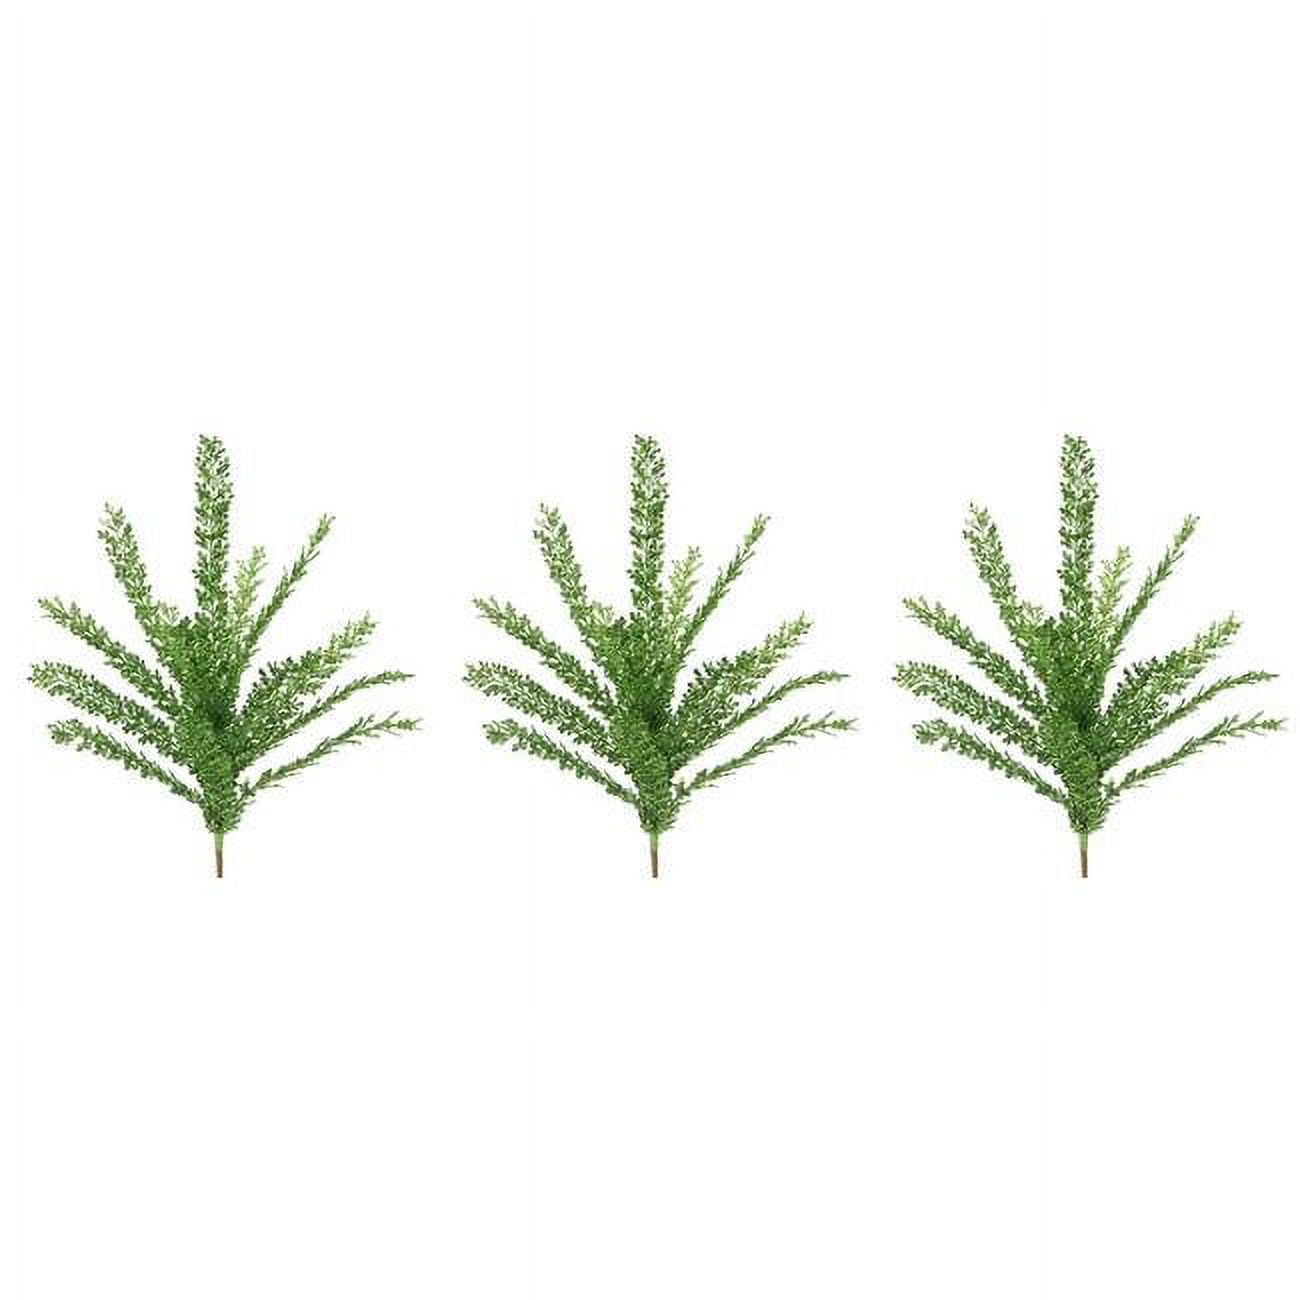 Picture of Admired by Nature GXL7706-GREEN-3 23 in. Glitter Filigree Leaf Spray Christmas Decor, Green - Set of 3